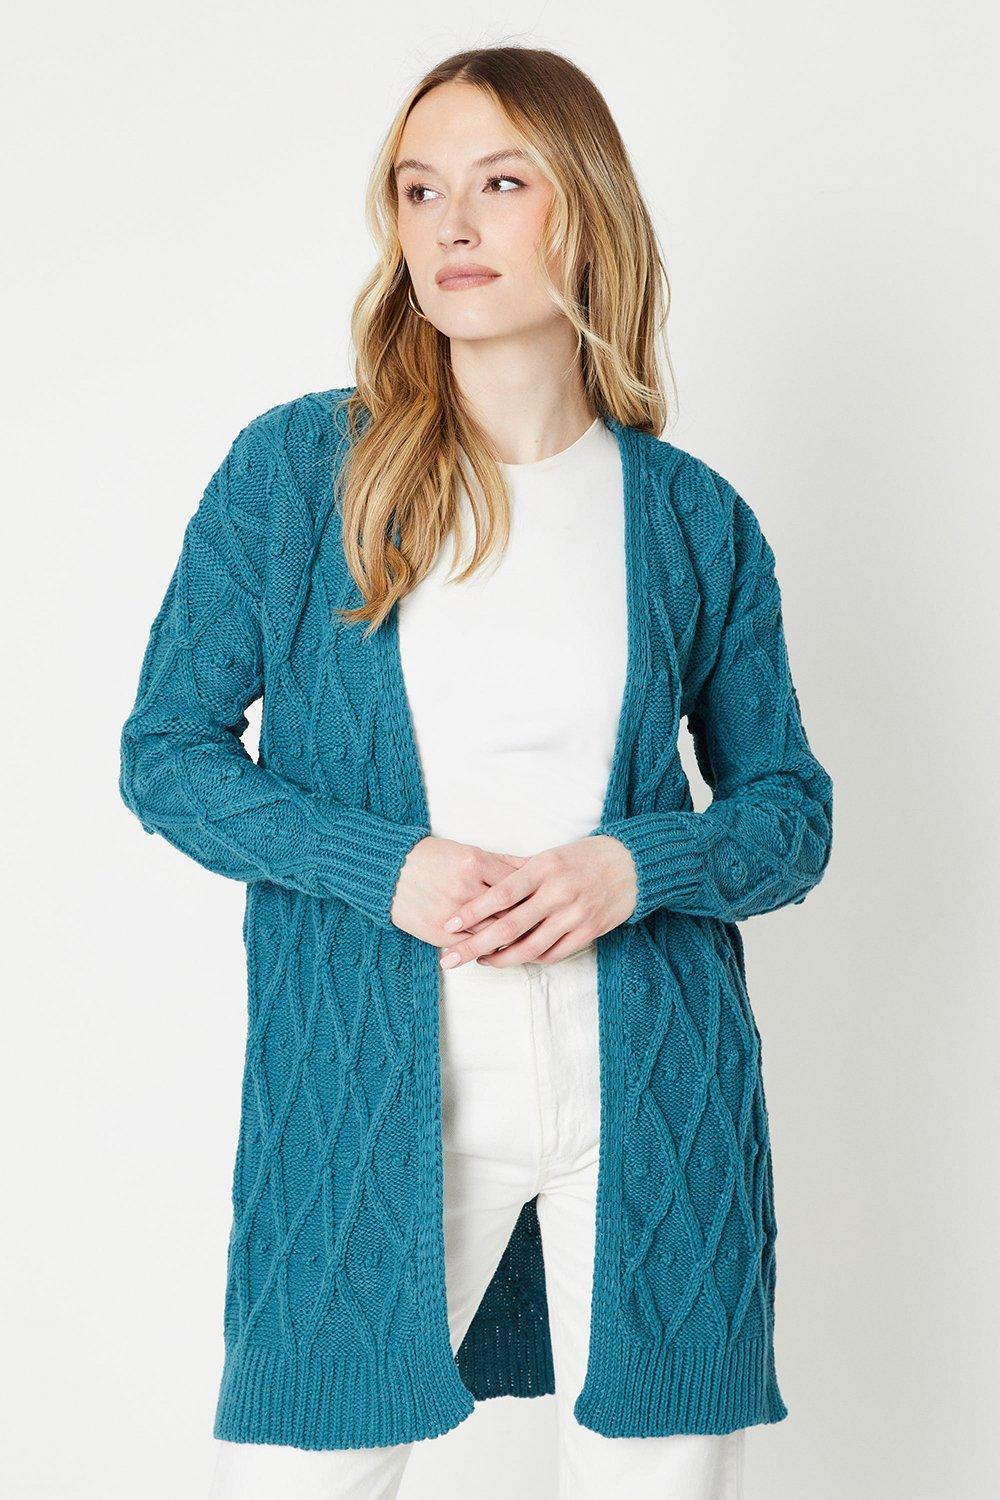 Women's Bobble Cable Cardigan - teal - M